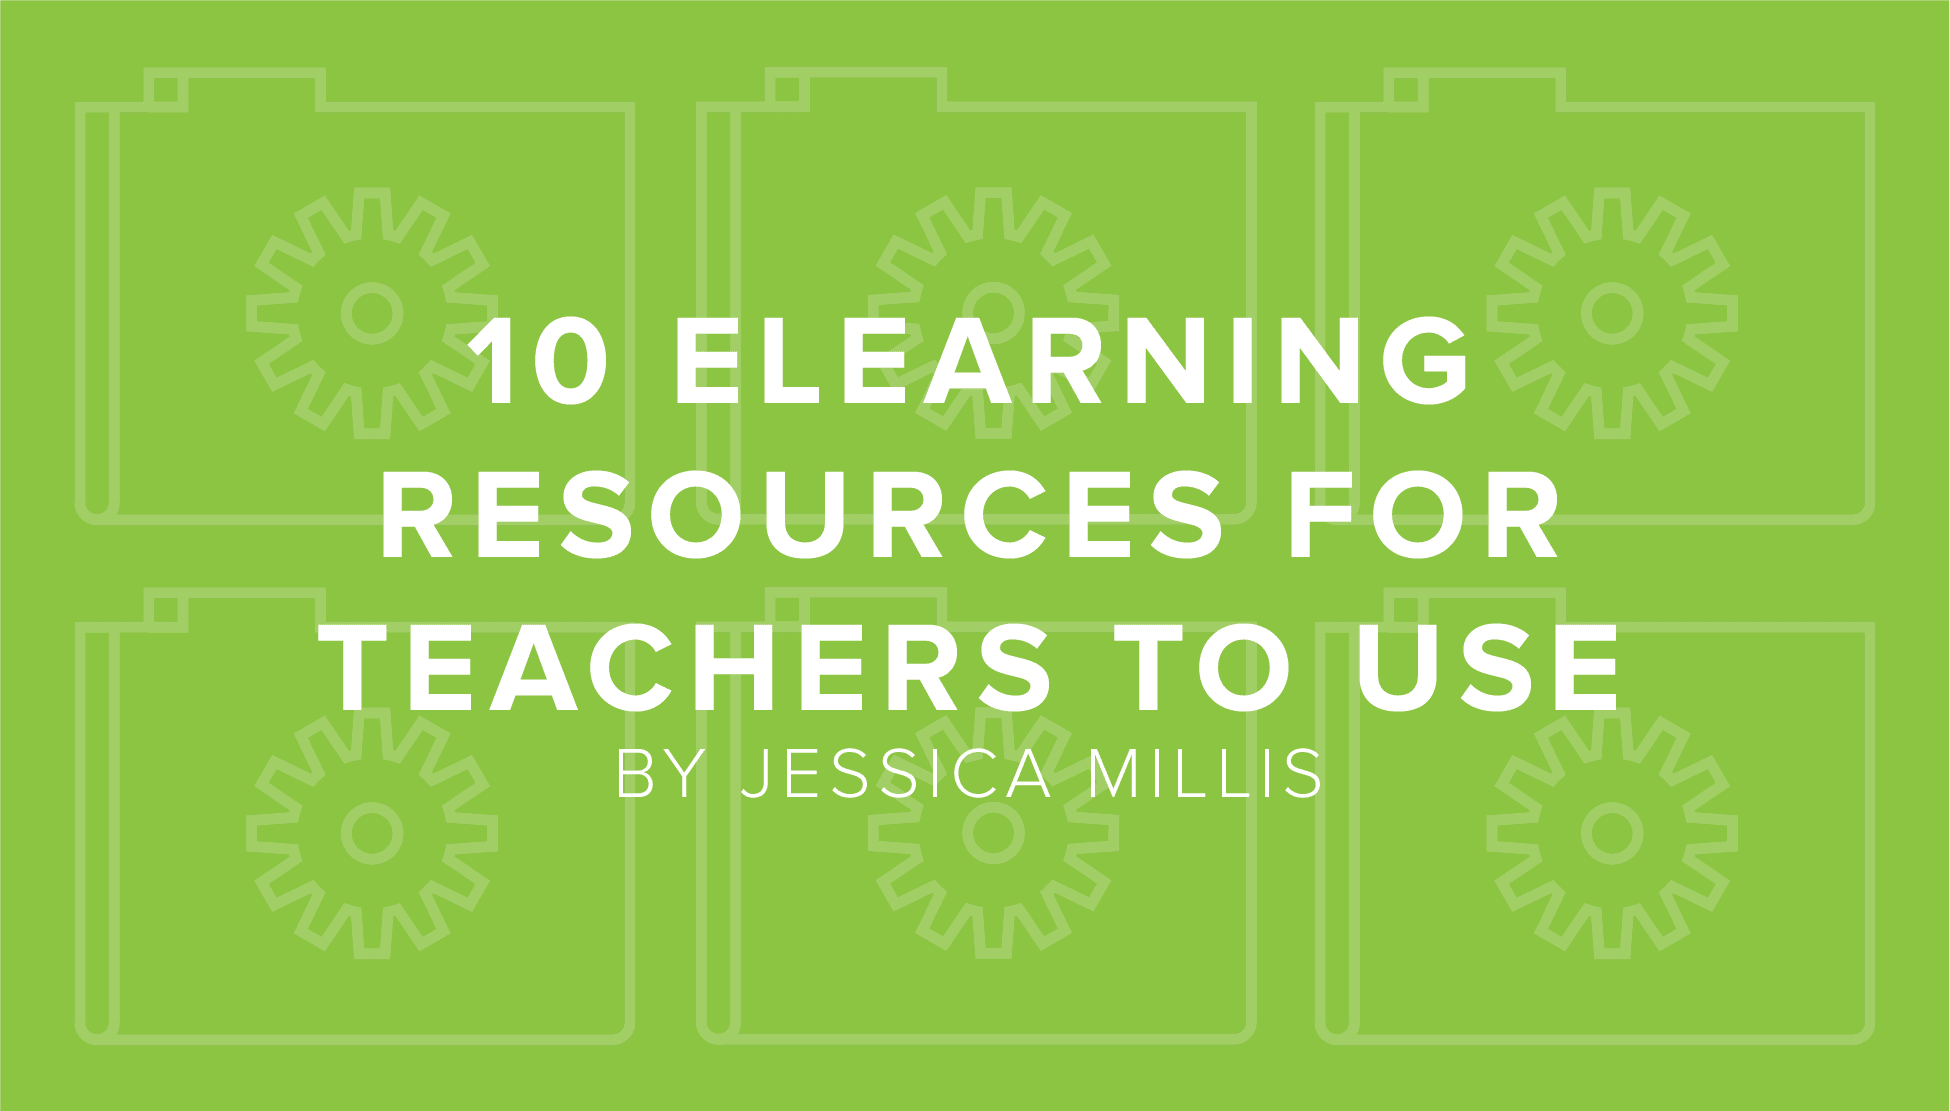 DigitalChalk: 10 eLearning Resources for Teachers to Use in the Upcoming Academic Year by Jessica Millis